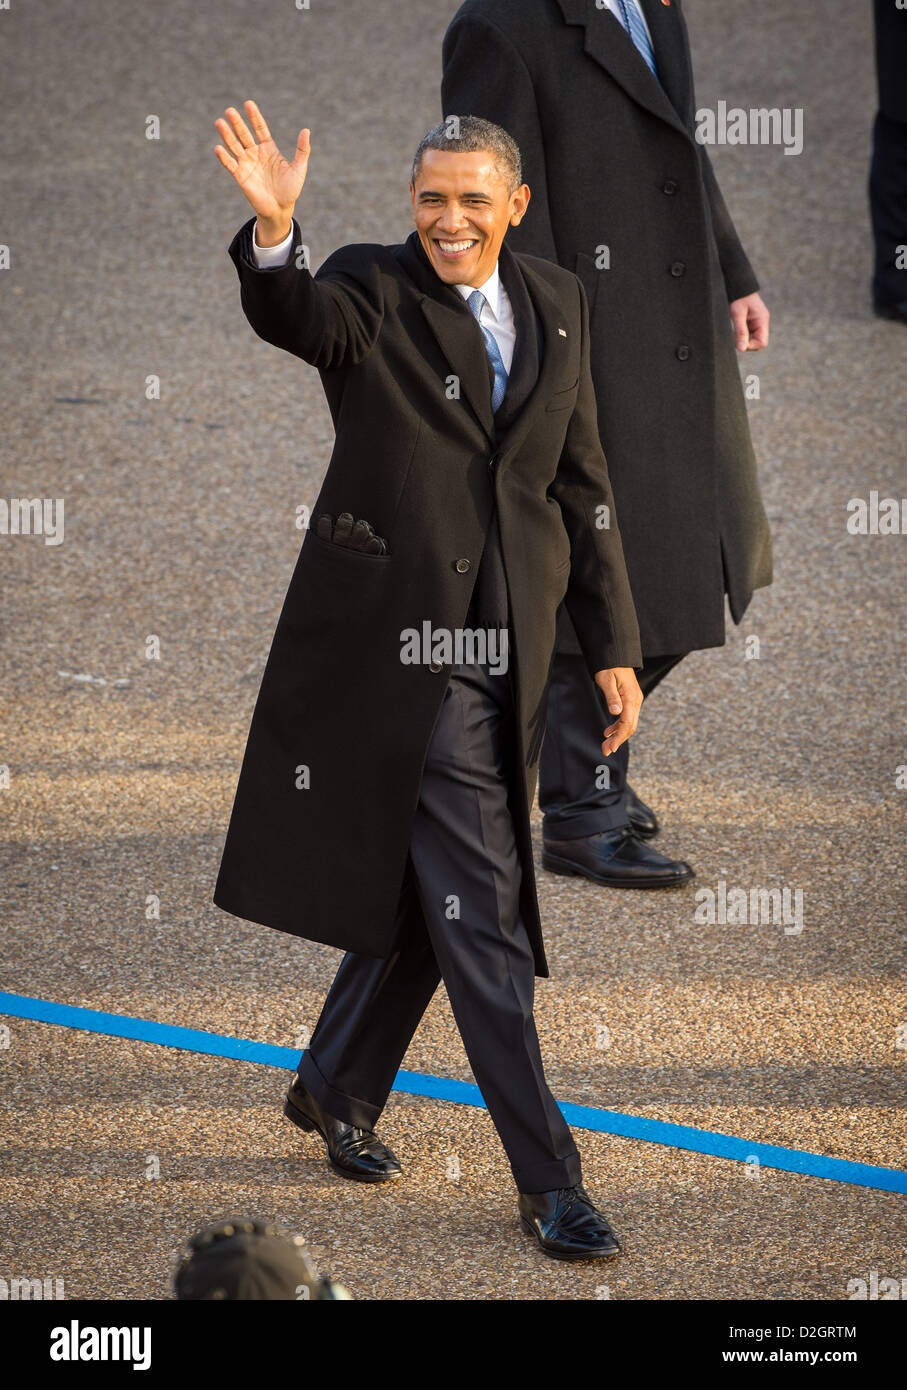 US President Barack Obama waves as he walks along Pennsylvania Avenue during the inaugural parade January 21, 2013 in Washington, DC. Obama was sworn-in as the nation's 44th President earlier in the day. Stock Photo